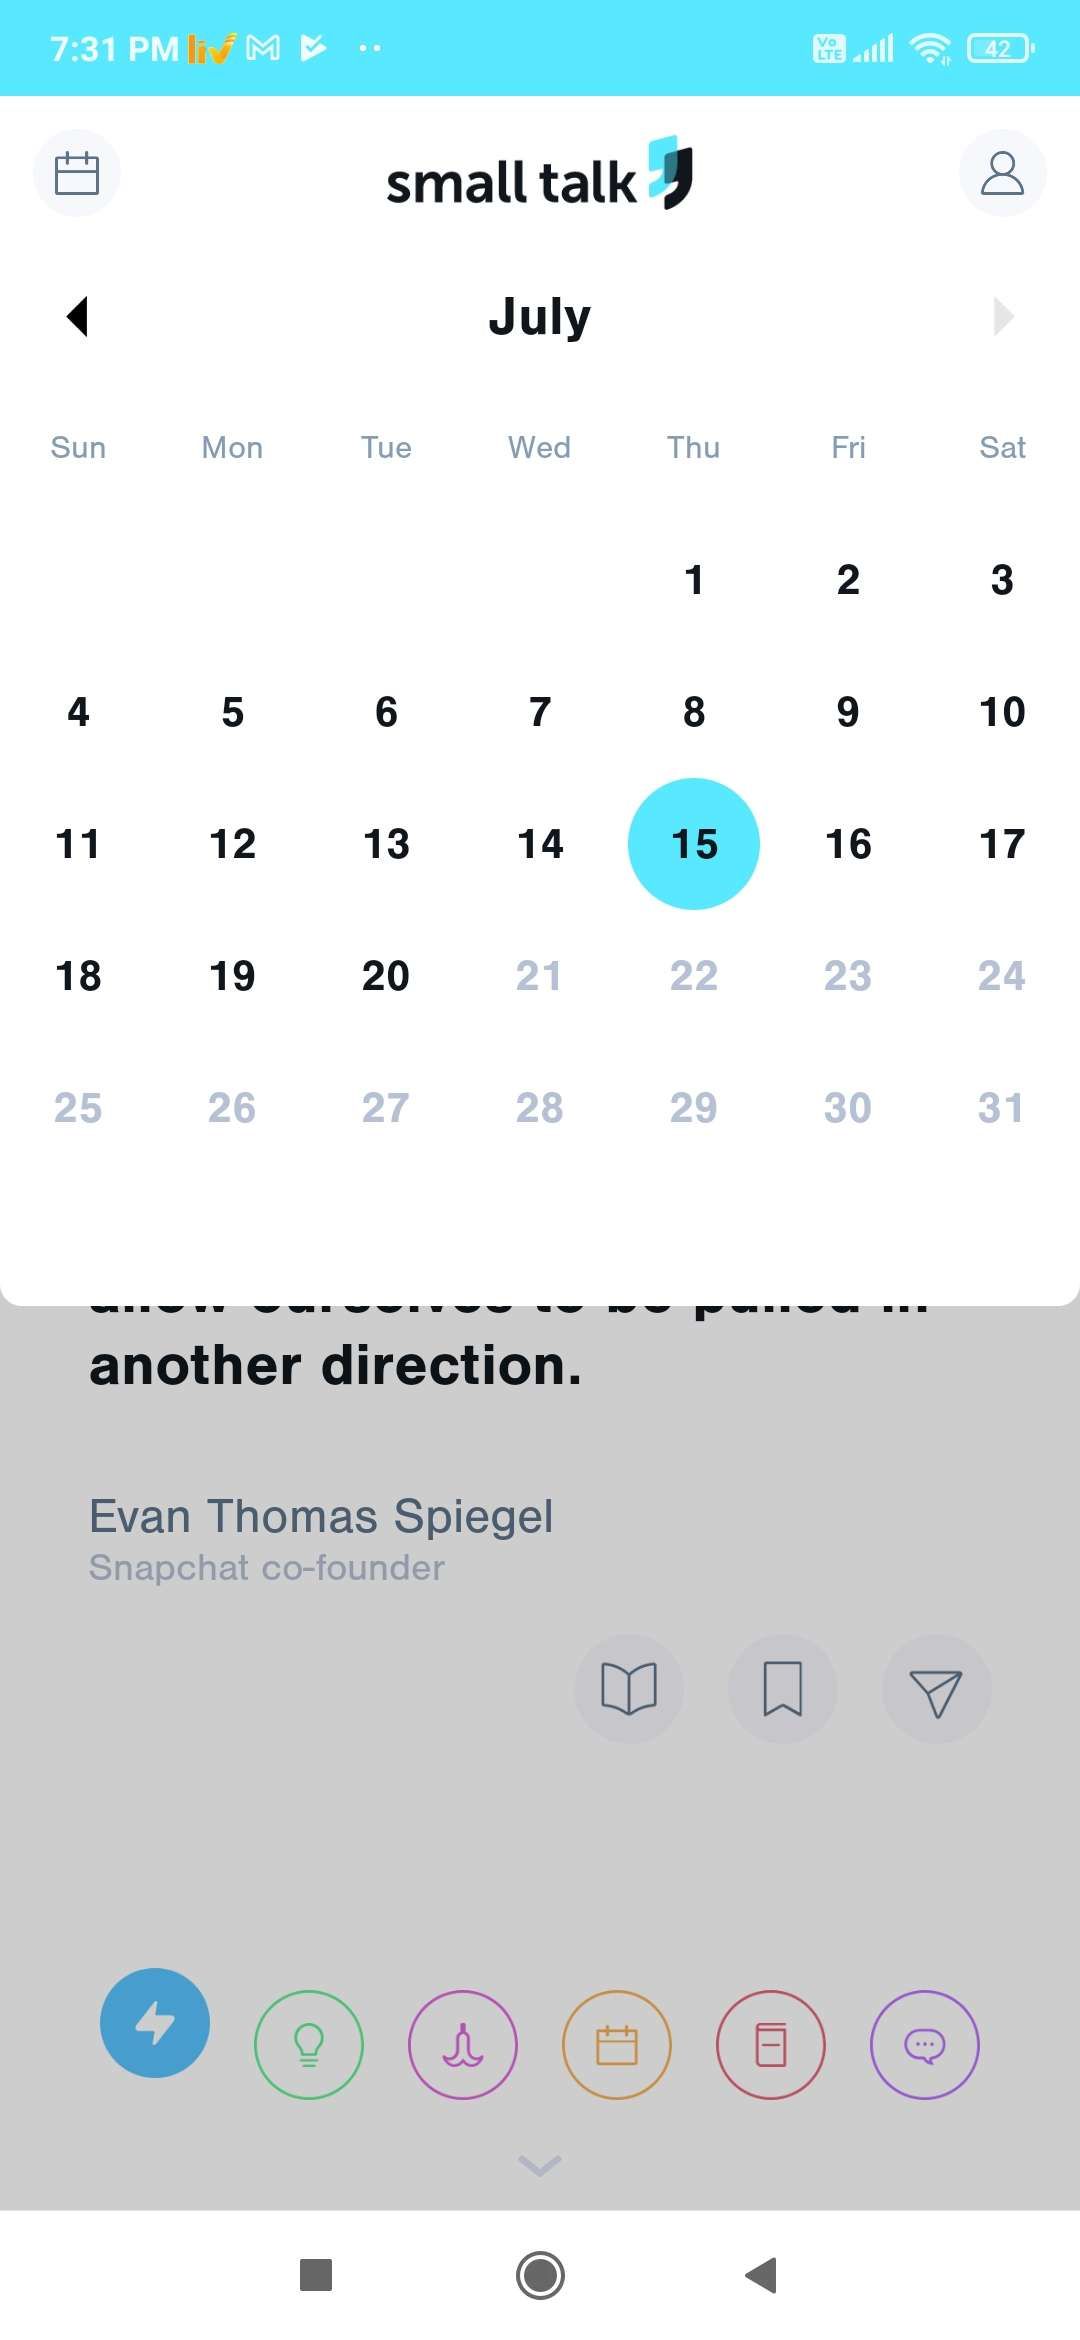 Use the calendar to go back to any old set of six topics on Small Talk